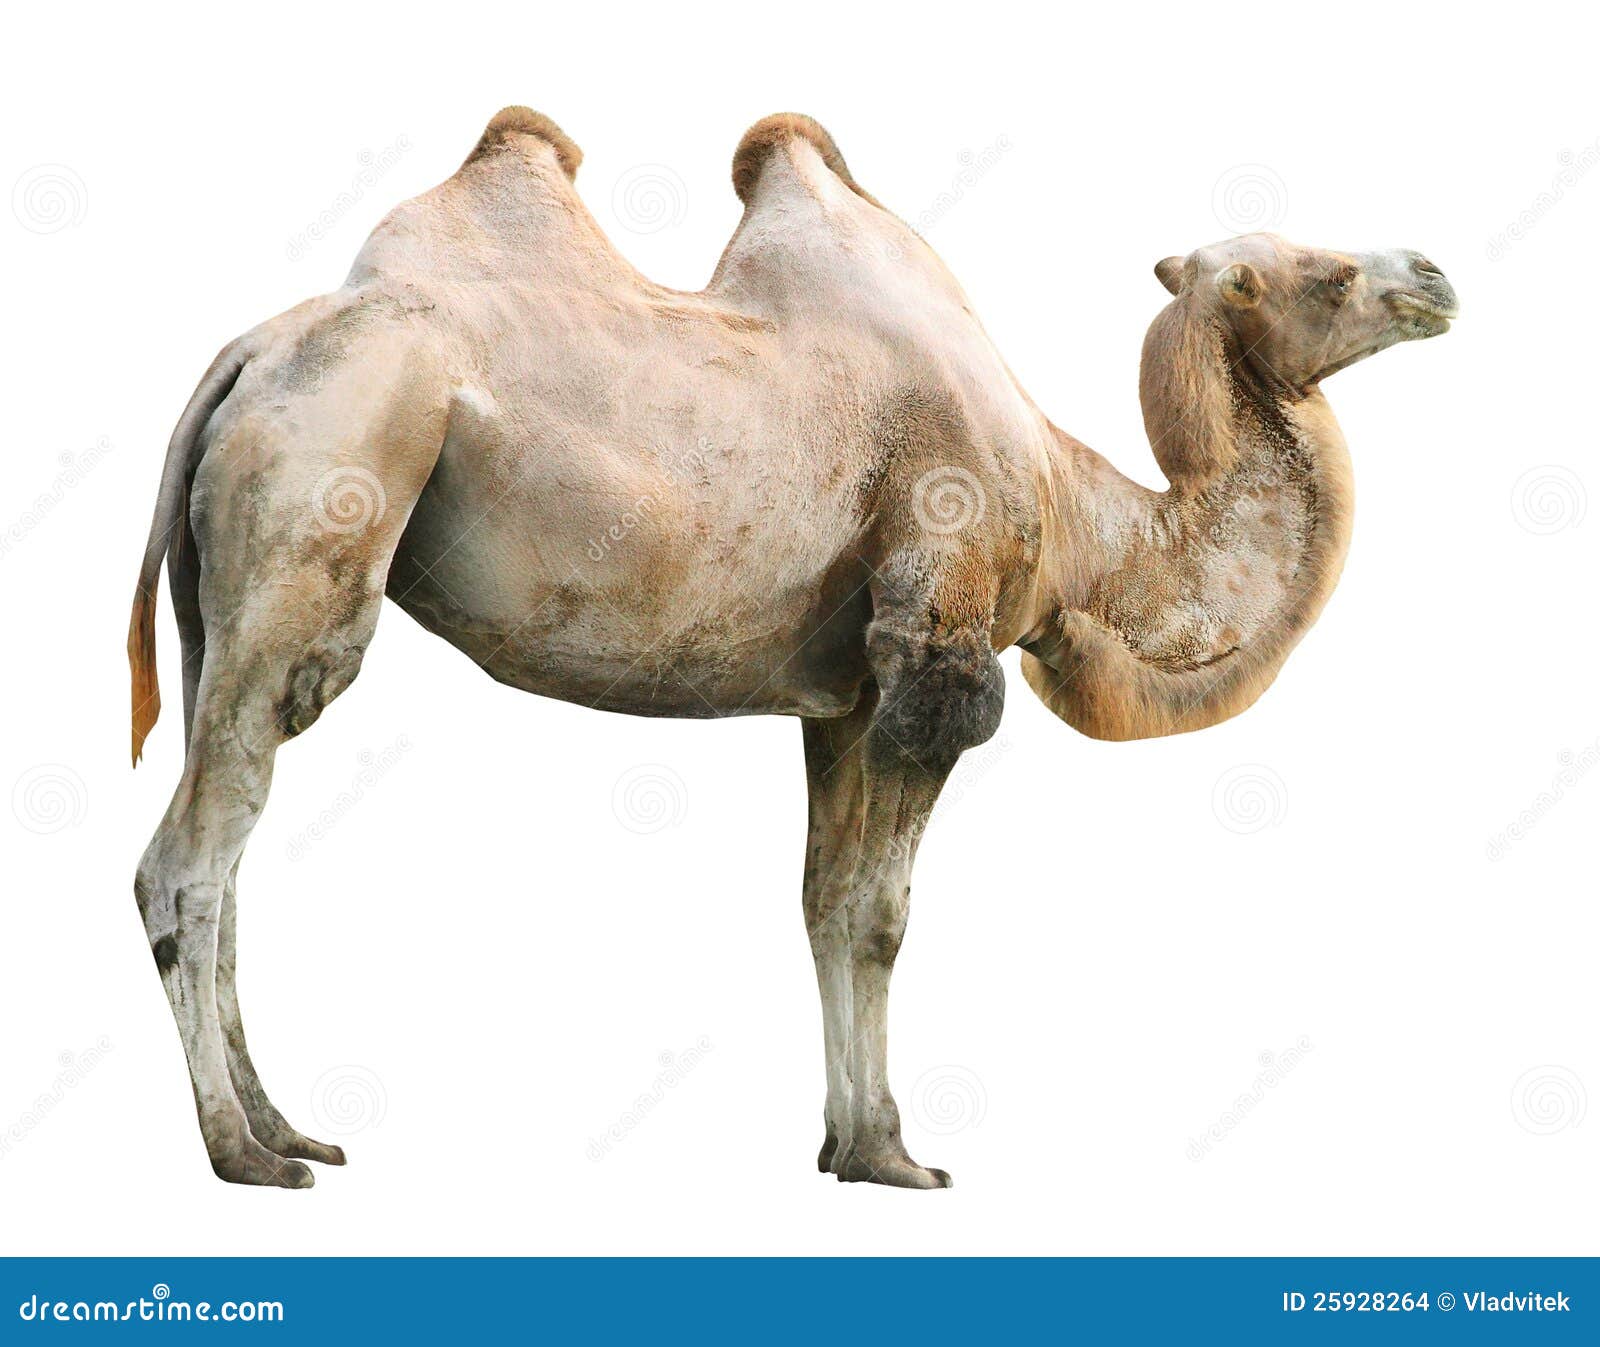 the camel.